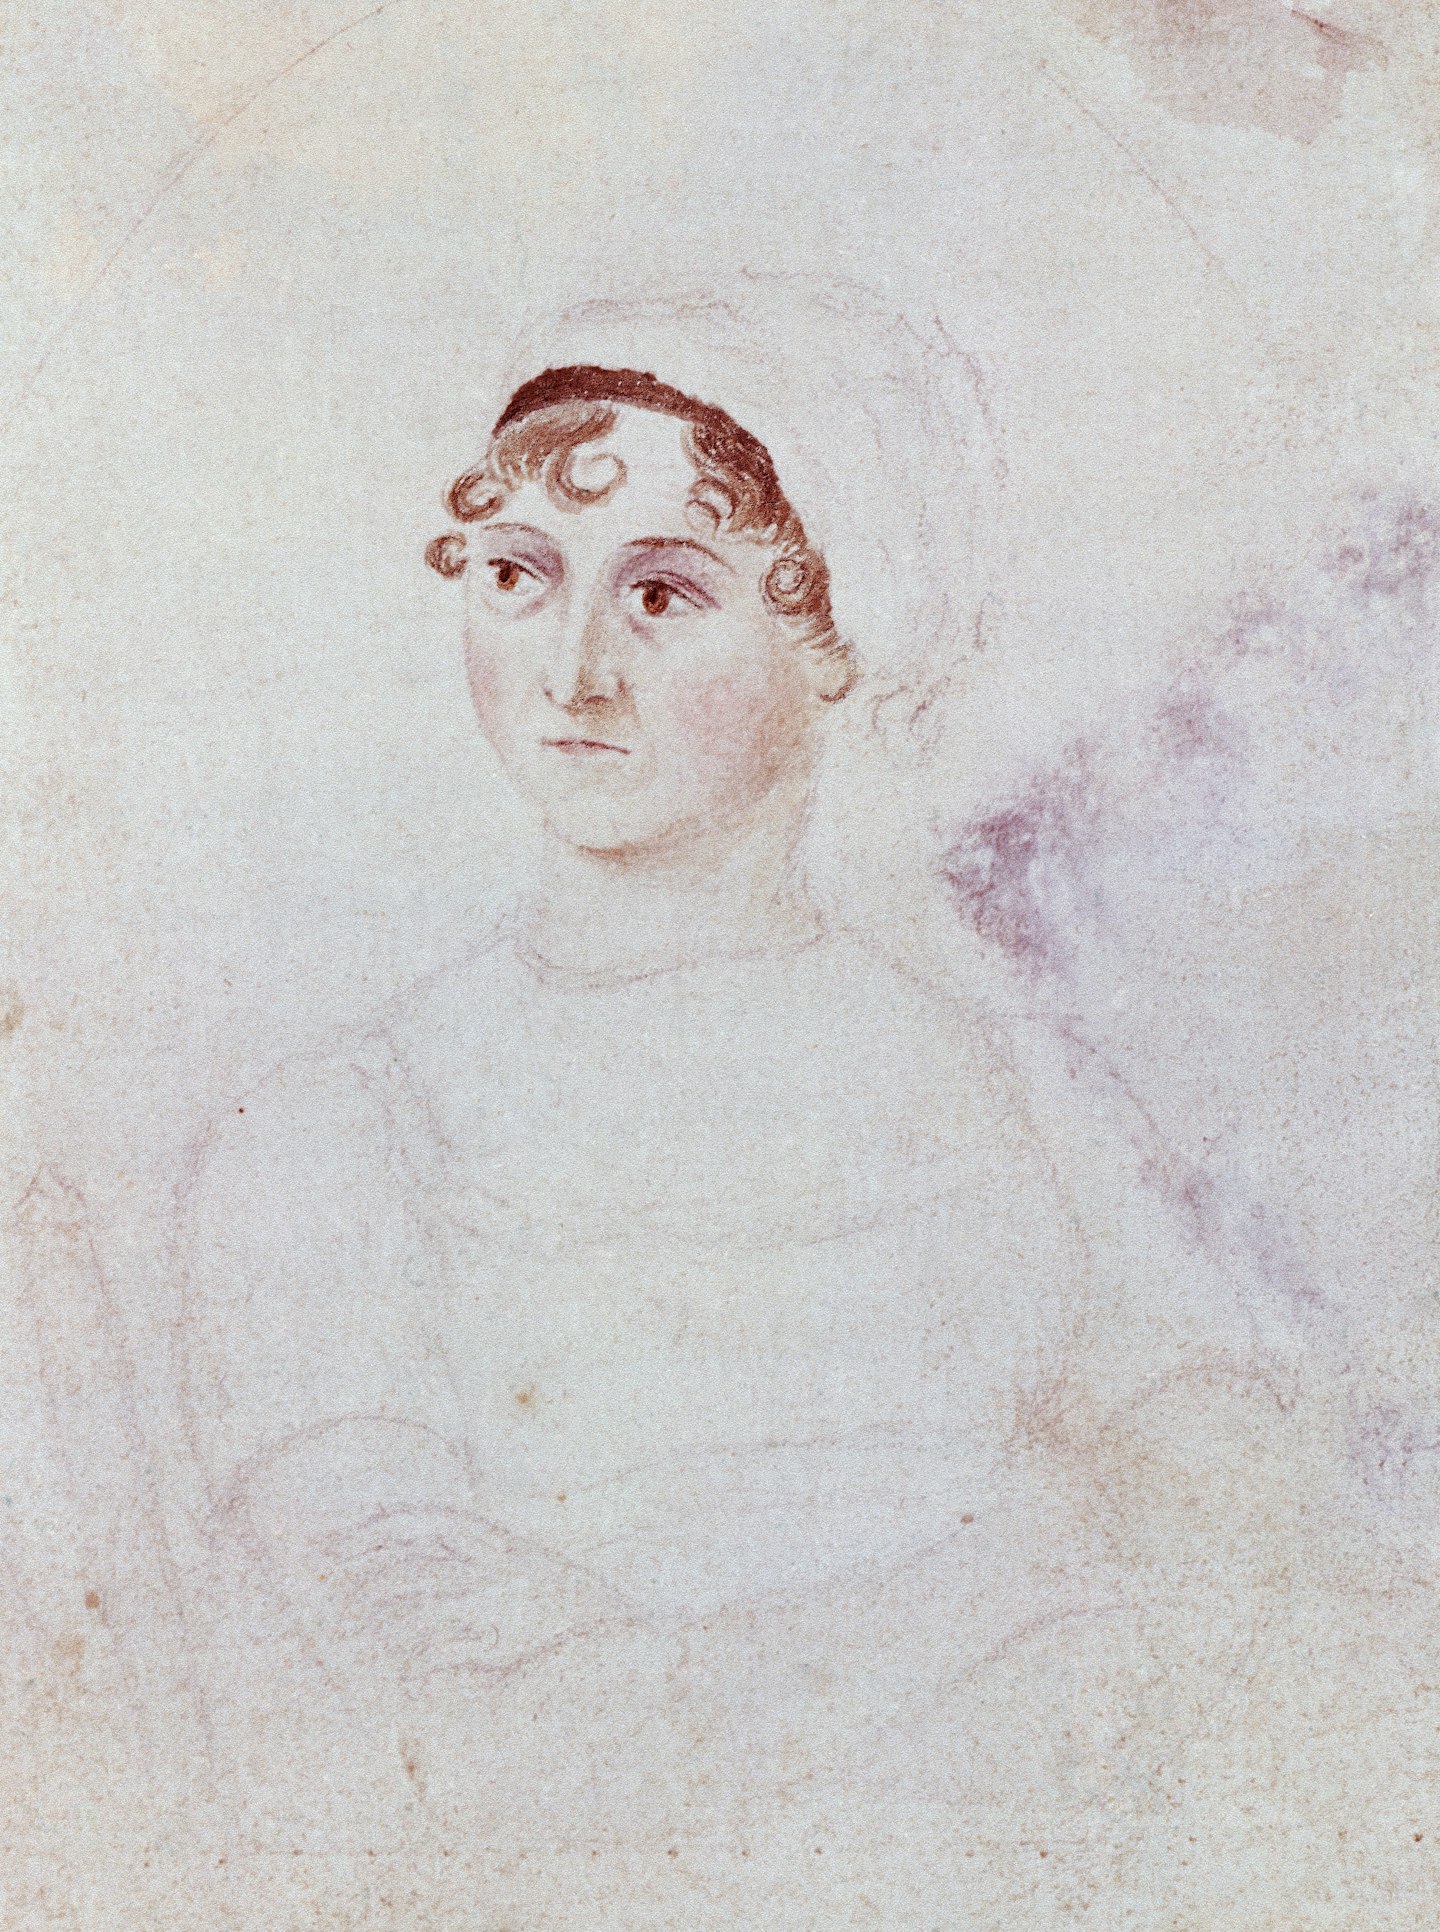 A sketch of Jane Austen at the National Portrait Gallery